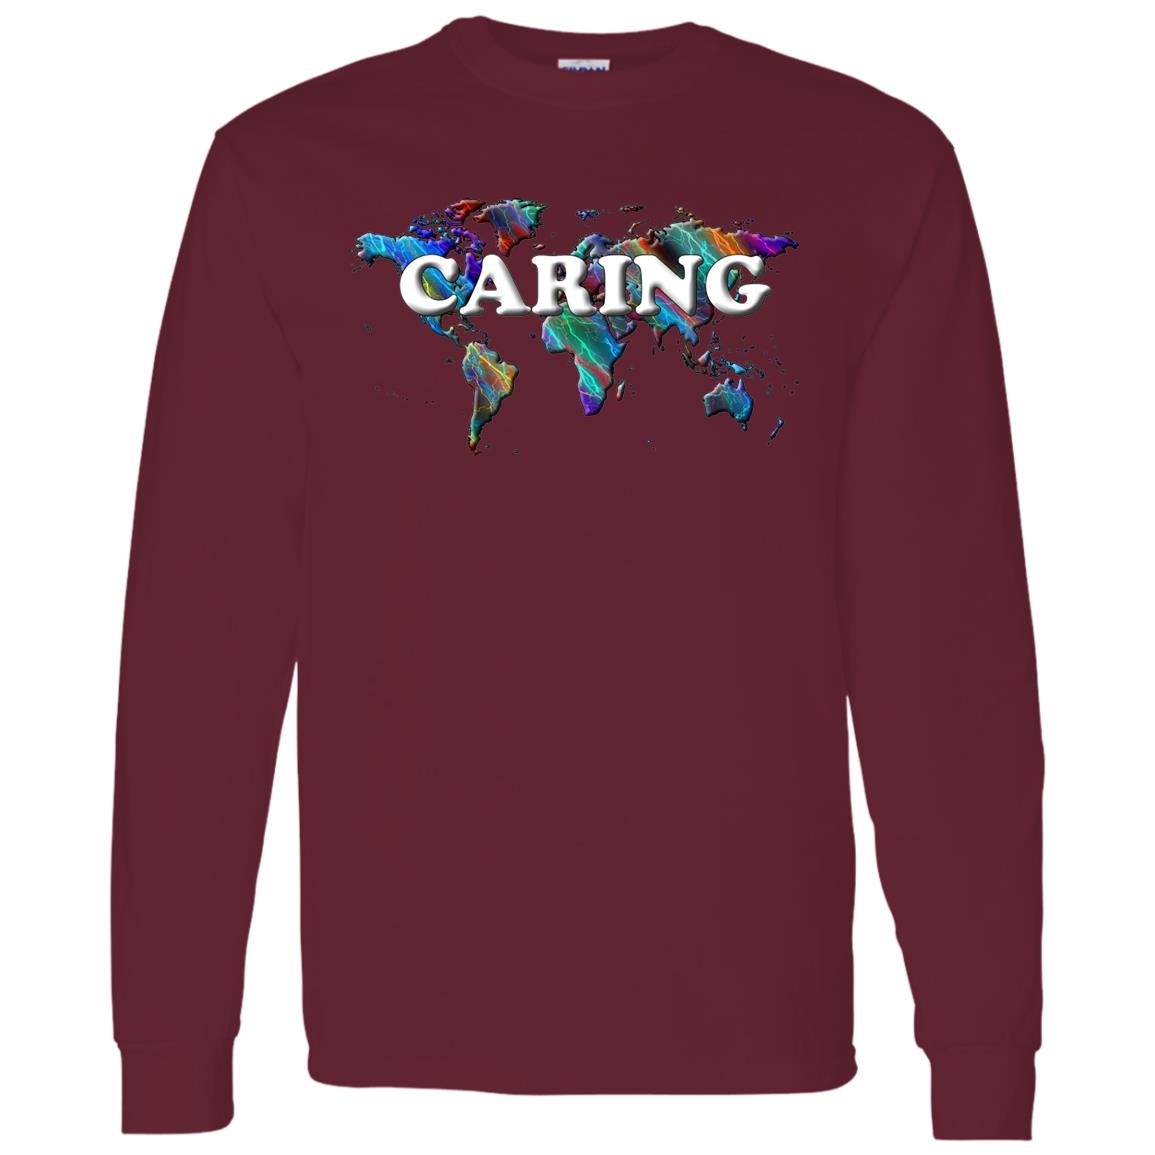 Caring Long Sleeve Statement T-Shirt